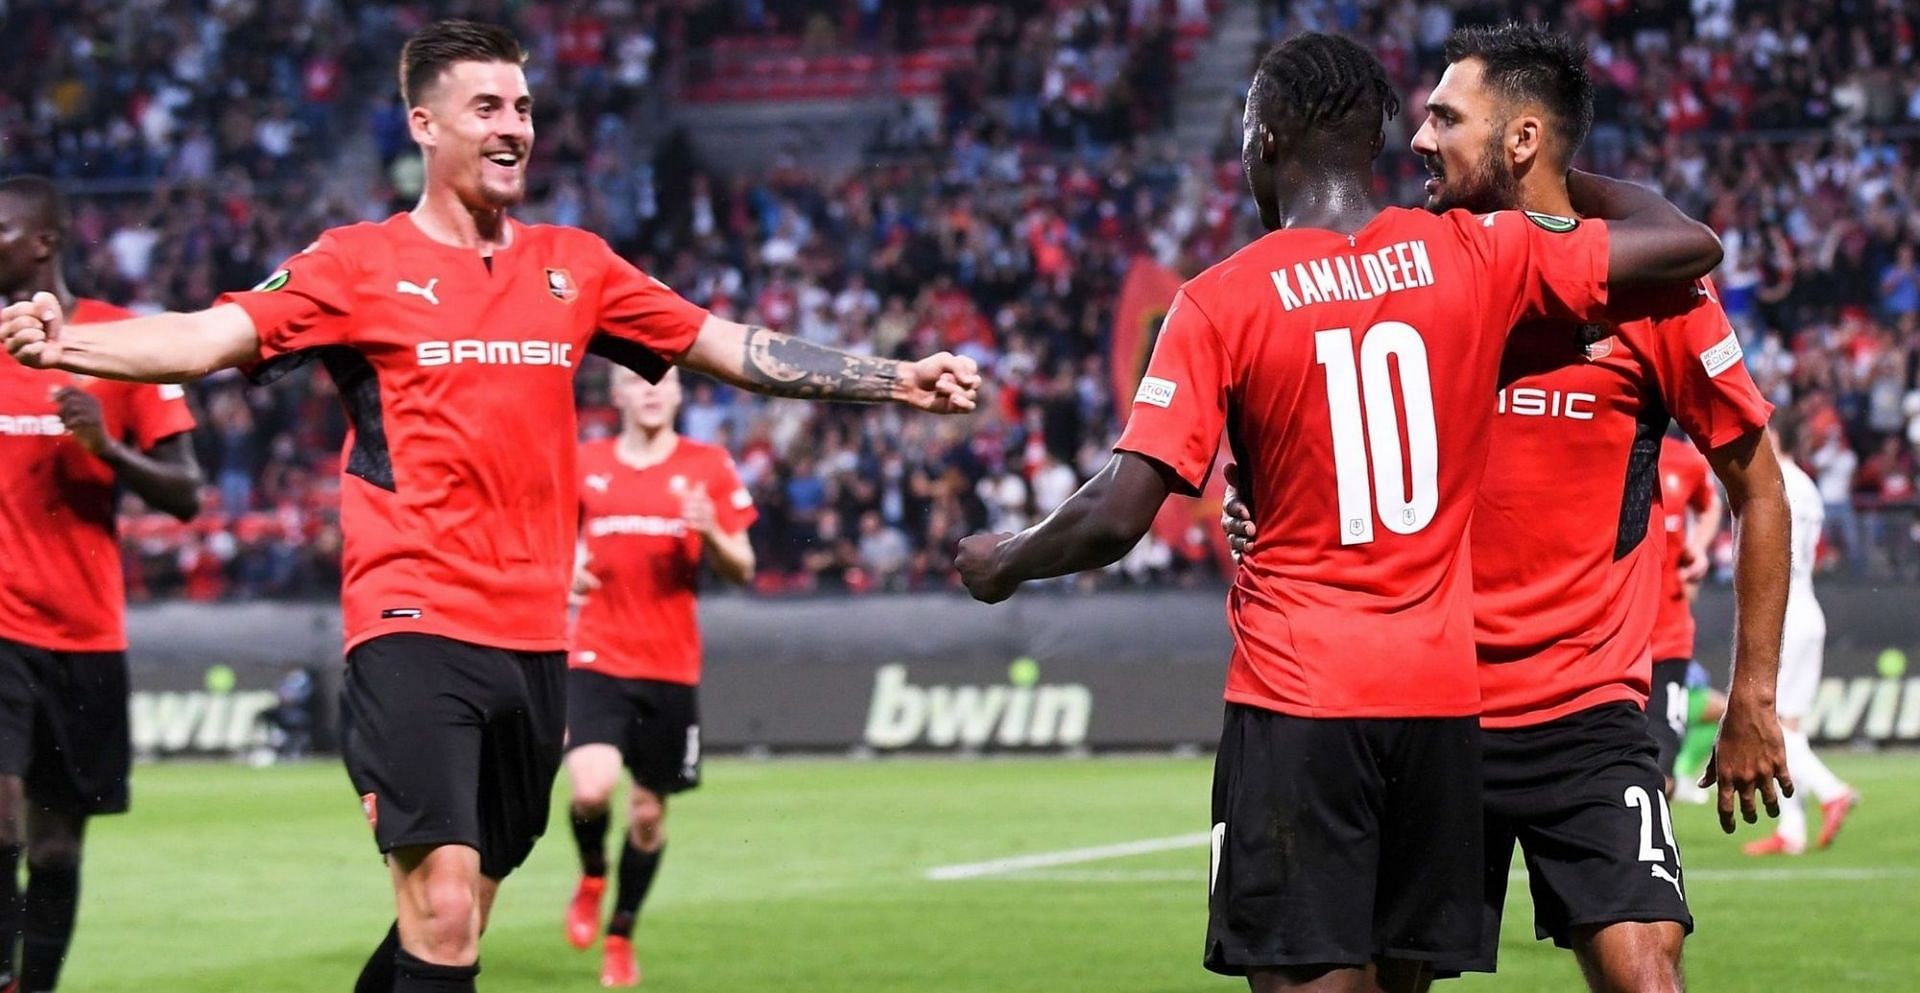 Rennes take on Saint-Etienne in their upcoming Ligue 1 fixture on Sunday